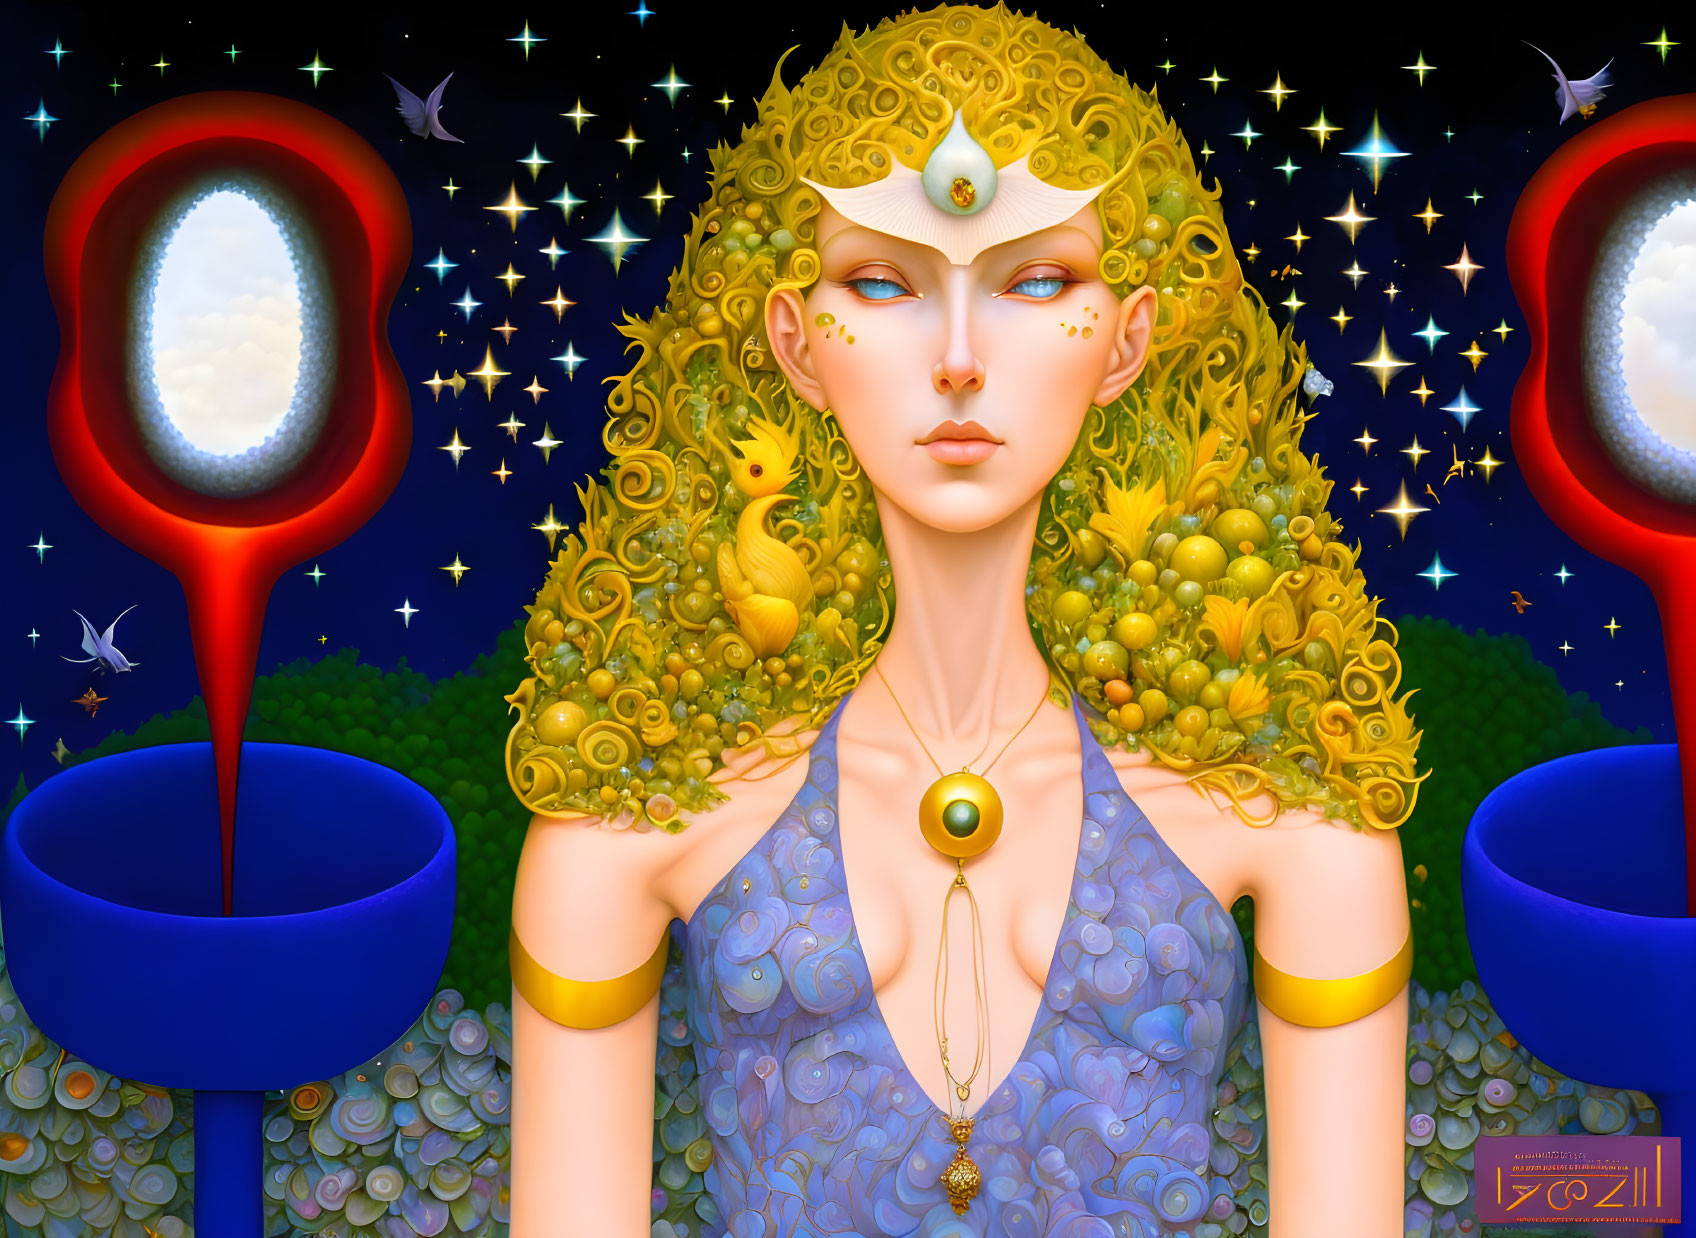 Woman with Golden Curls and Third Eye in Surreal Illustration